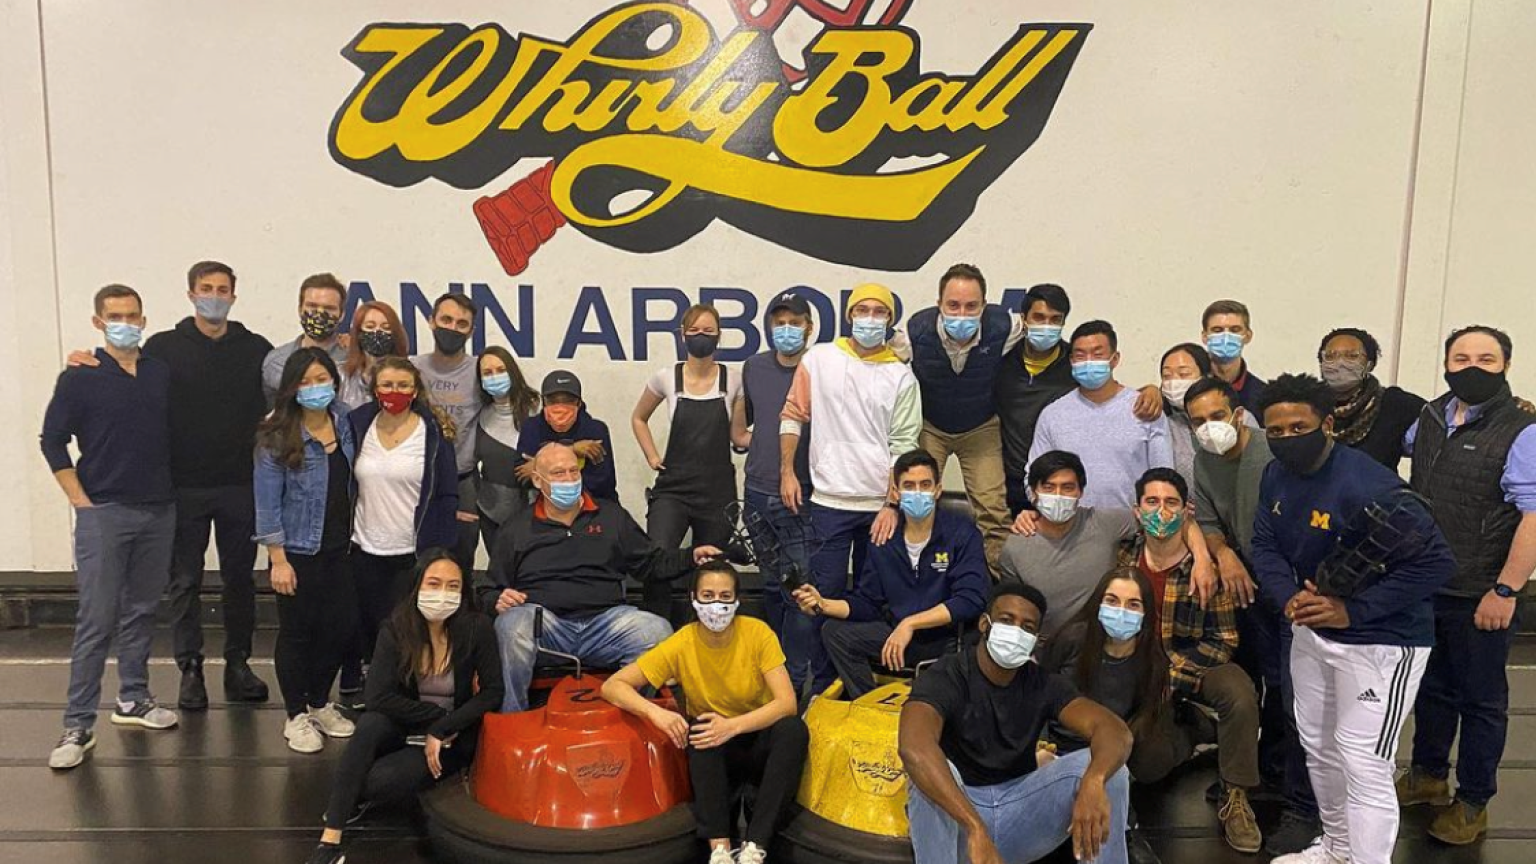 Residents Whirly Ball